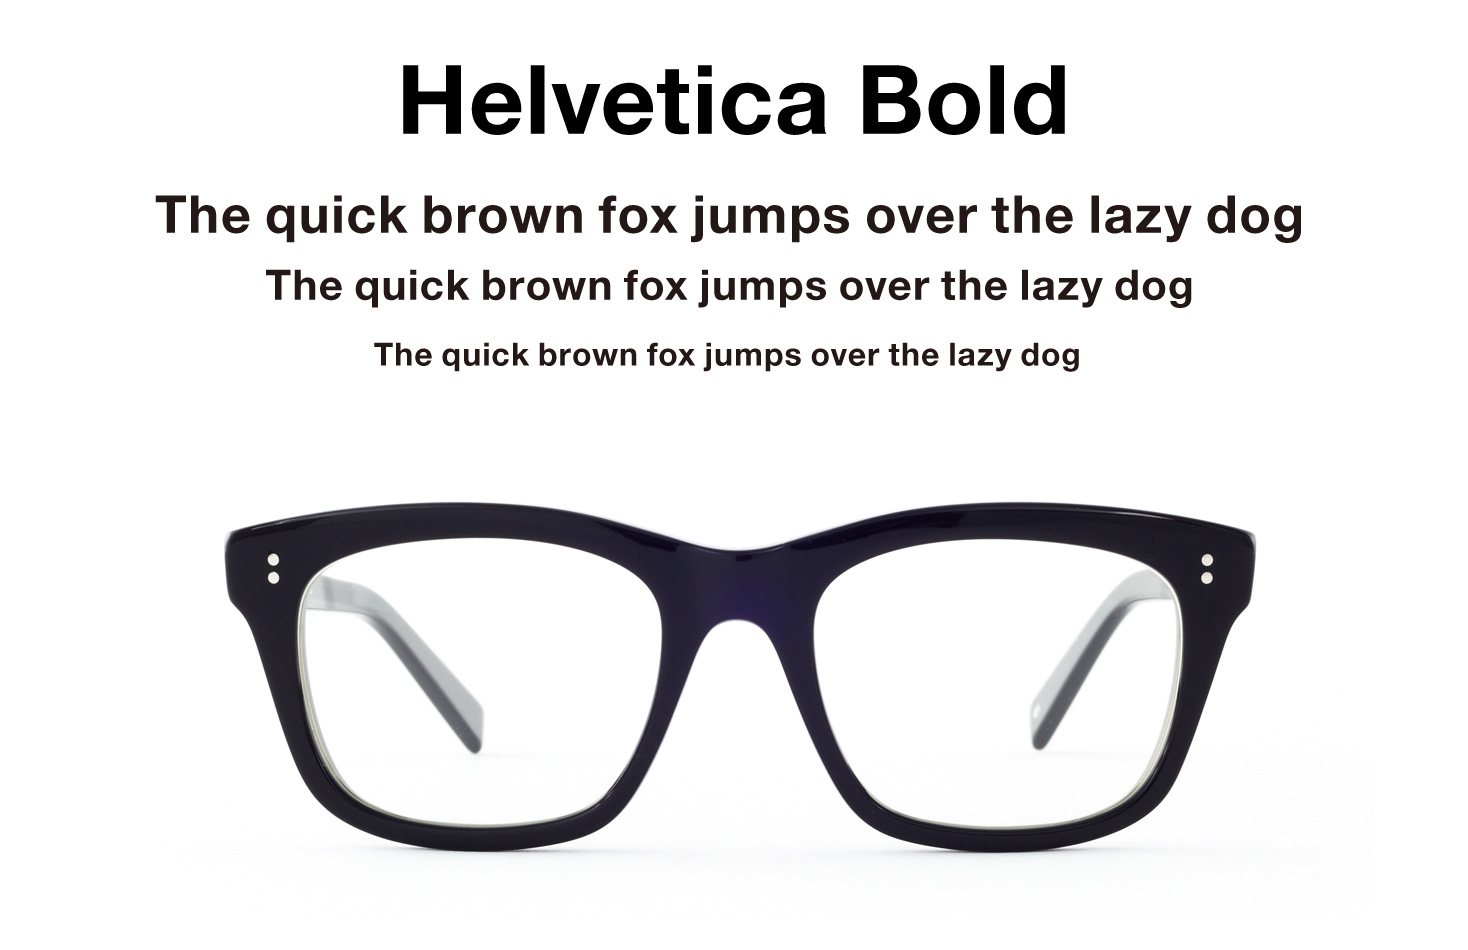 Type a Japanese eyewear brand - helvetica and garamond shaped spectacle frames